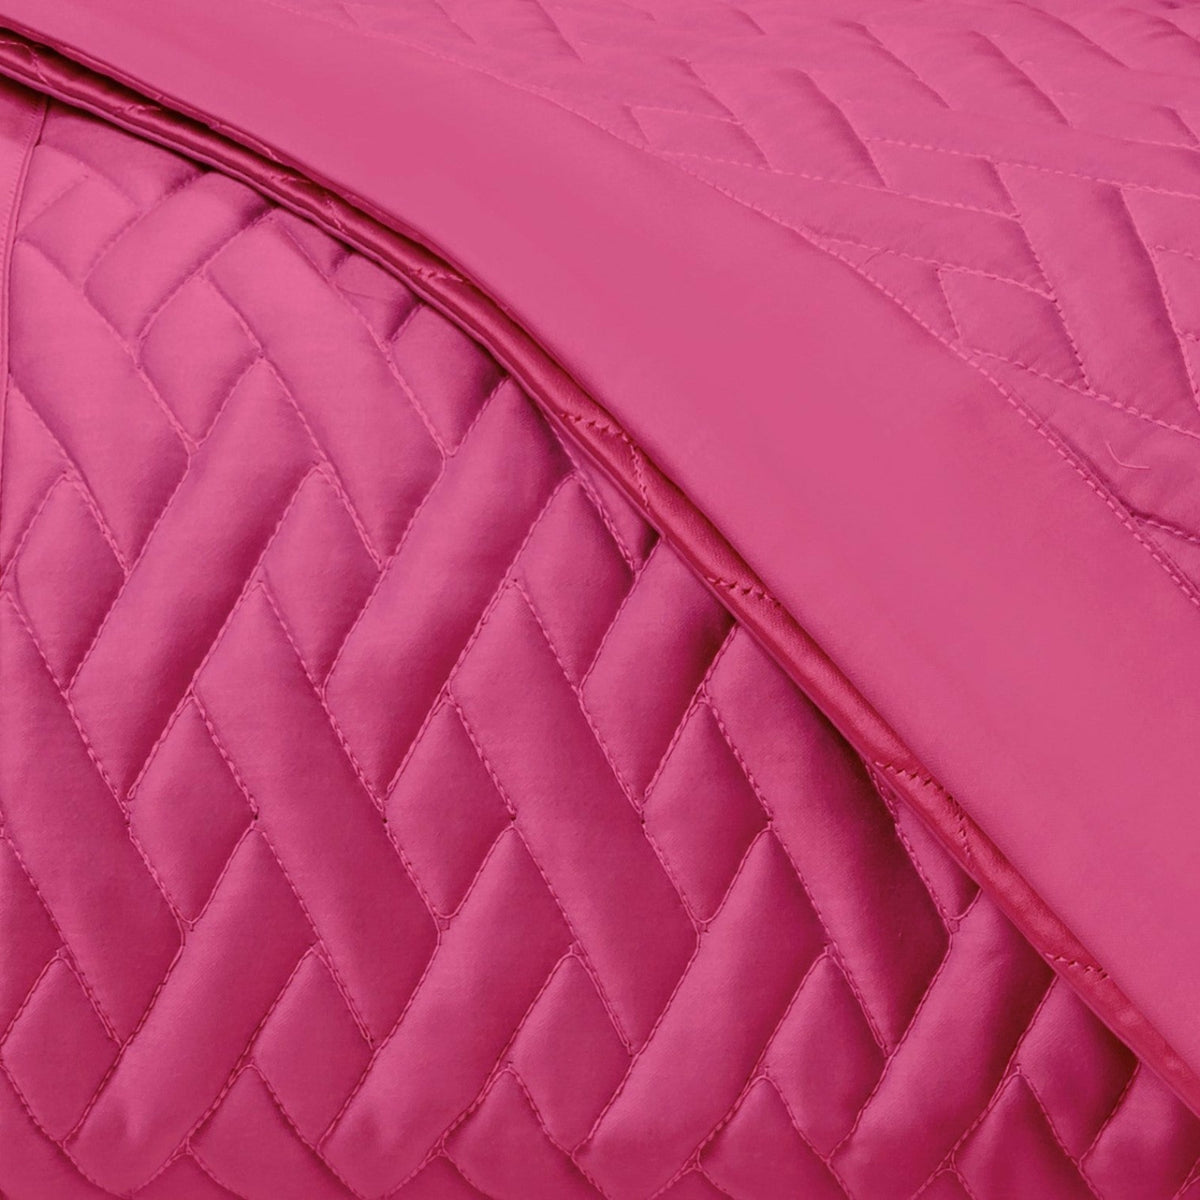 Home Treasures Viscaya Quilted Bedding Swatch Bright Pink Fine Linens